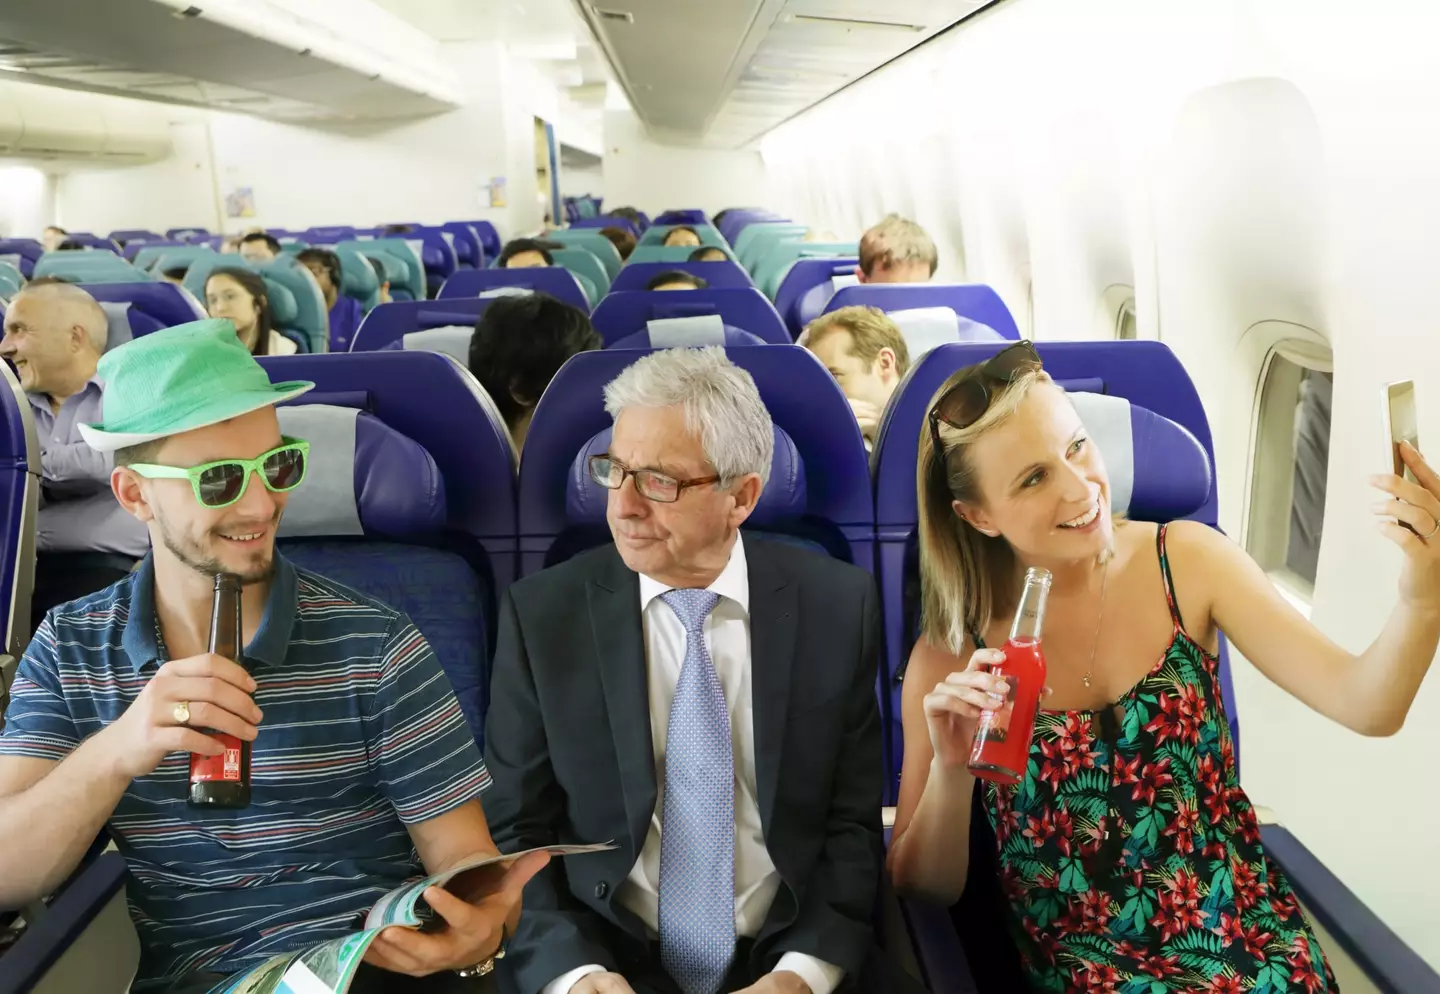 The couple certainly didn't enjoy the flight (stock image).